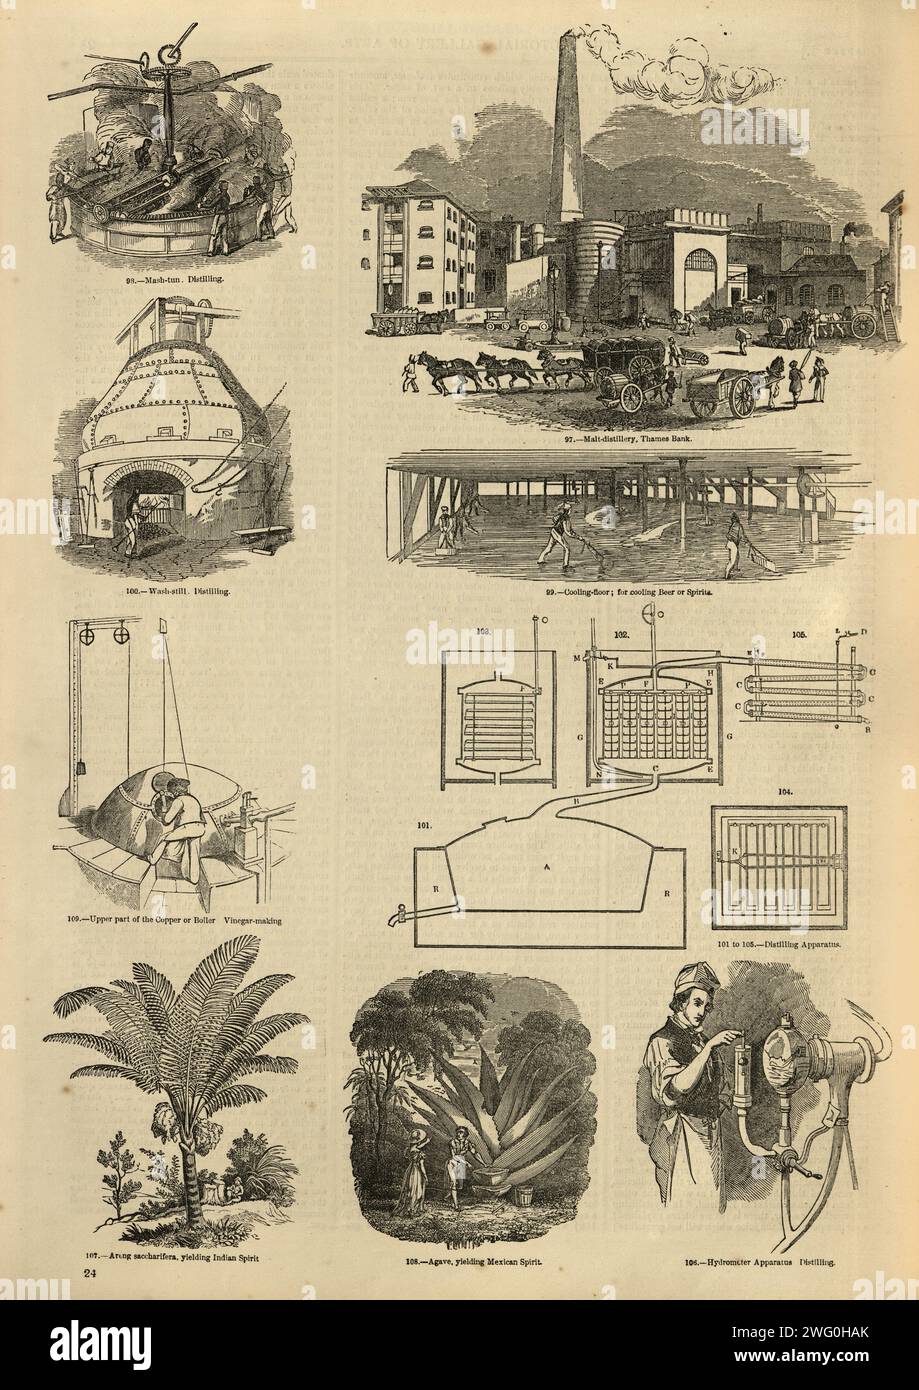 Page of old illustrations about the distillery brewing industry, Brewery, Distillation, History, 1850s 19th Century Stock Photo